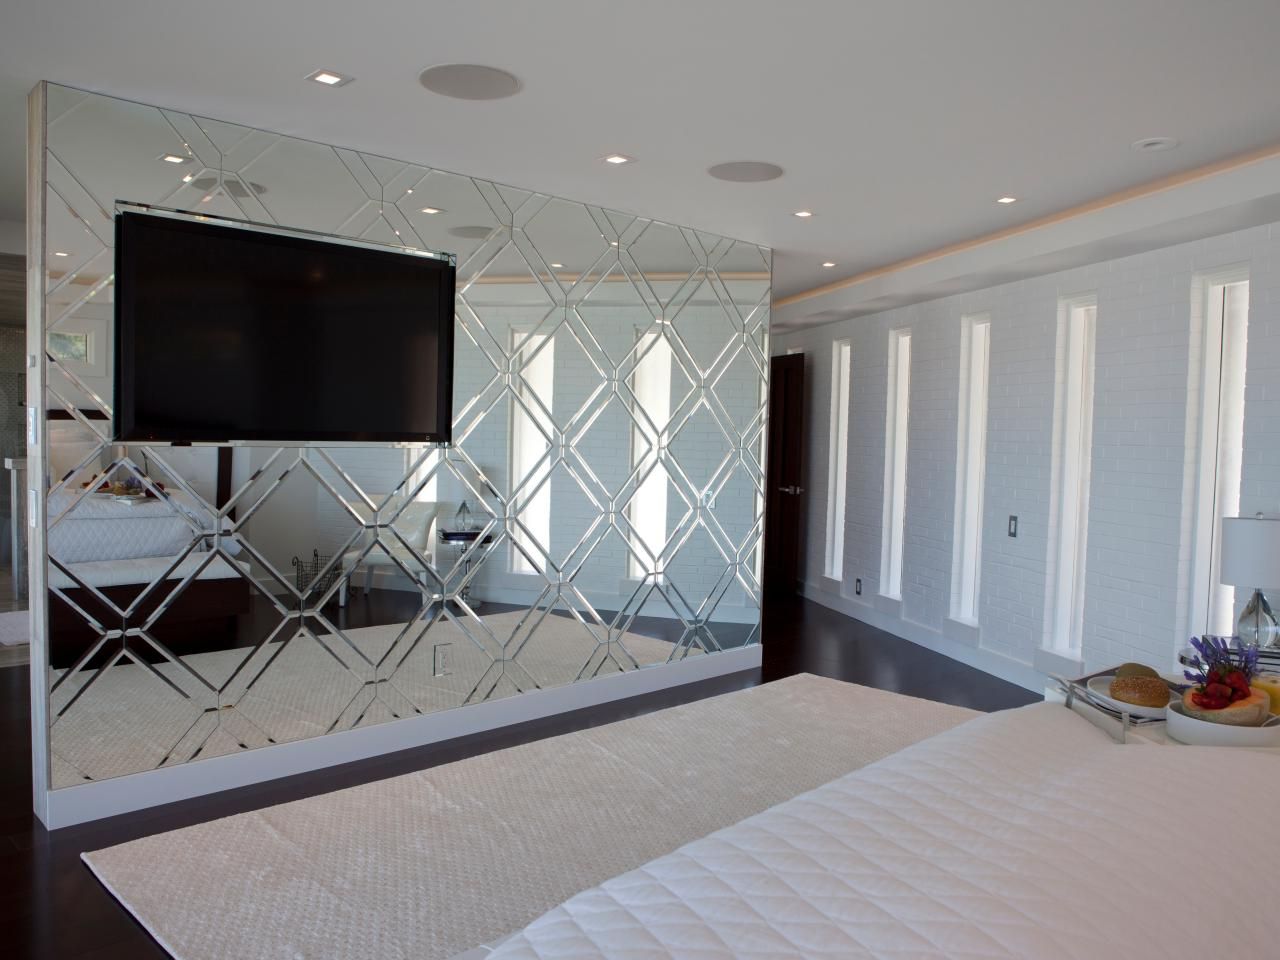 Preferred Full Wall Mirrors Intended For Bedroom Wall Mirror Houzz Design Ideas Bathroom Mirrors Simple (View 8 of 20)